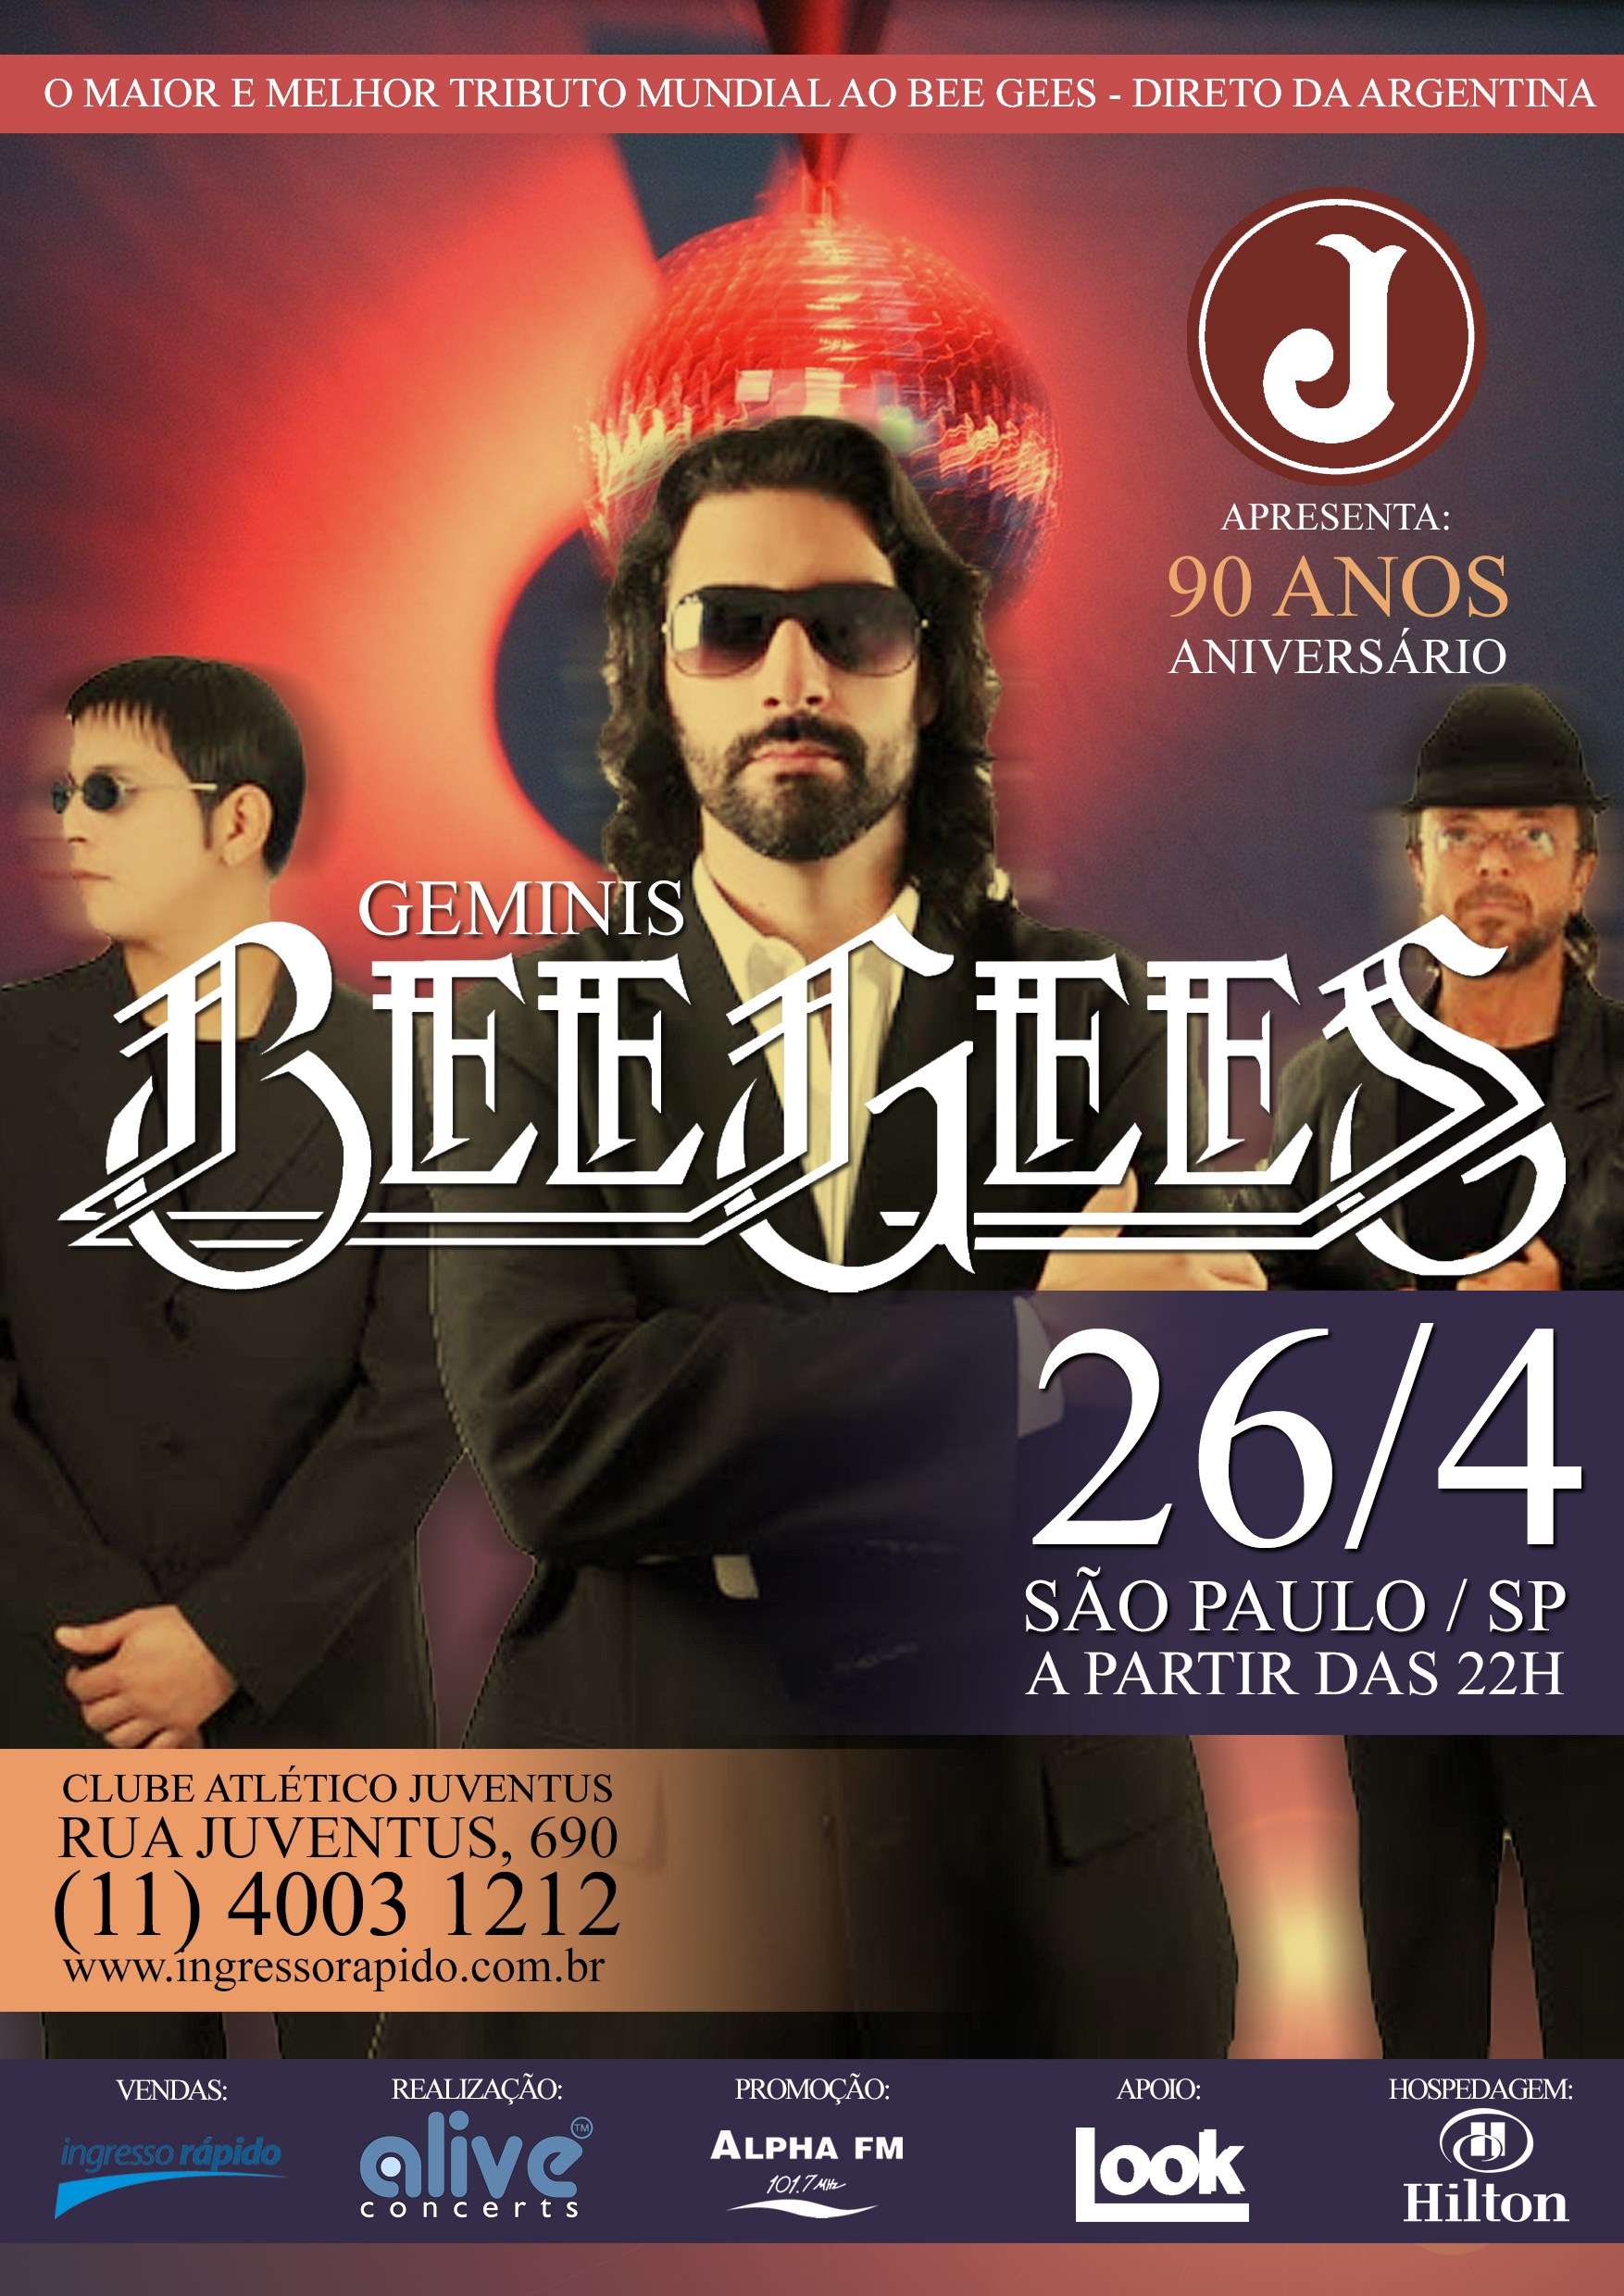 Show Geminis Bee Gees